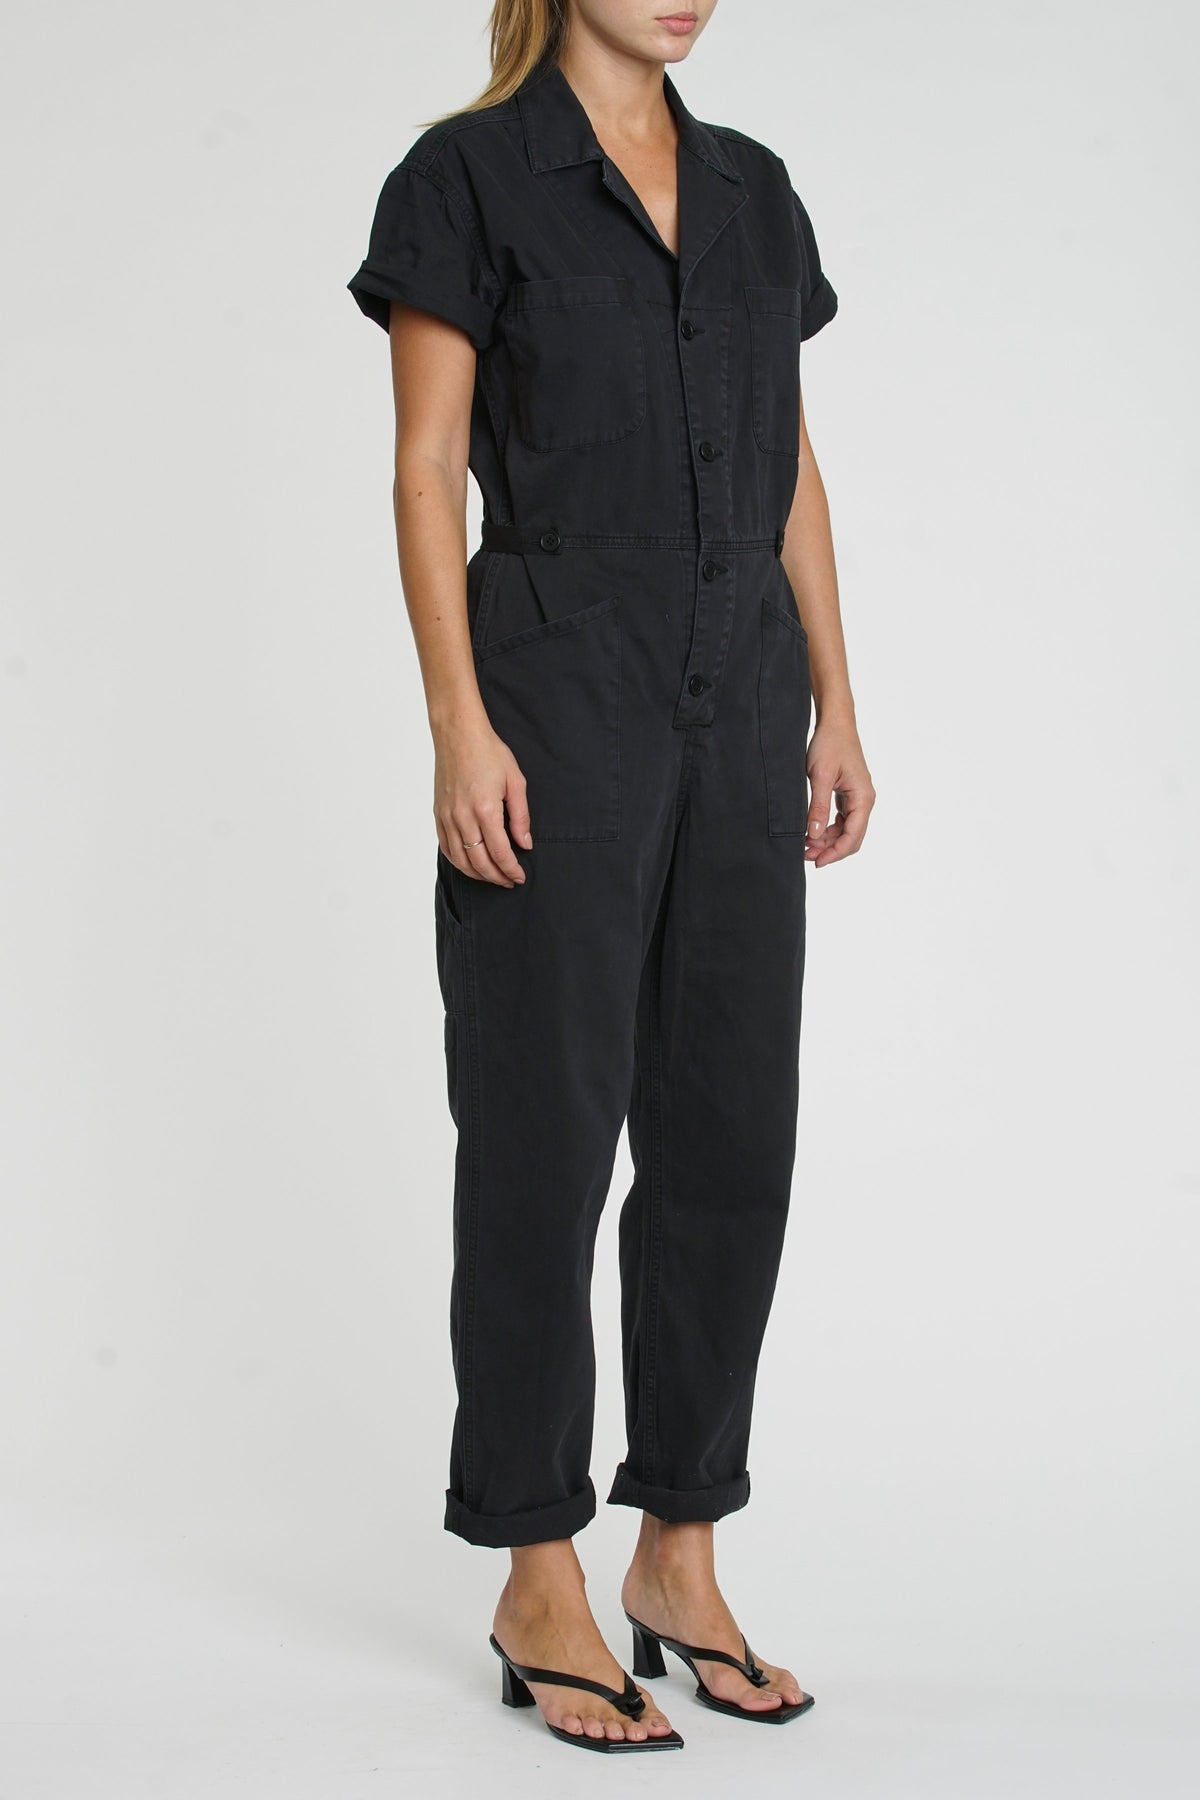 Pistola - Grover Cotton Worker Jumpsuit - Fade to Black